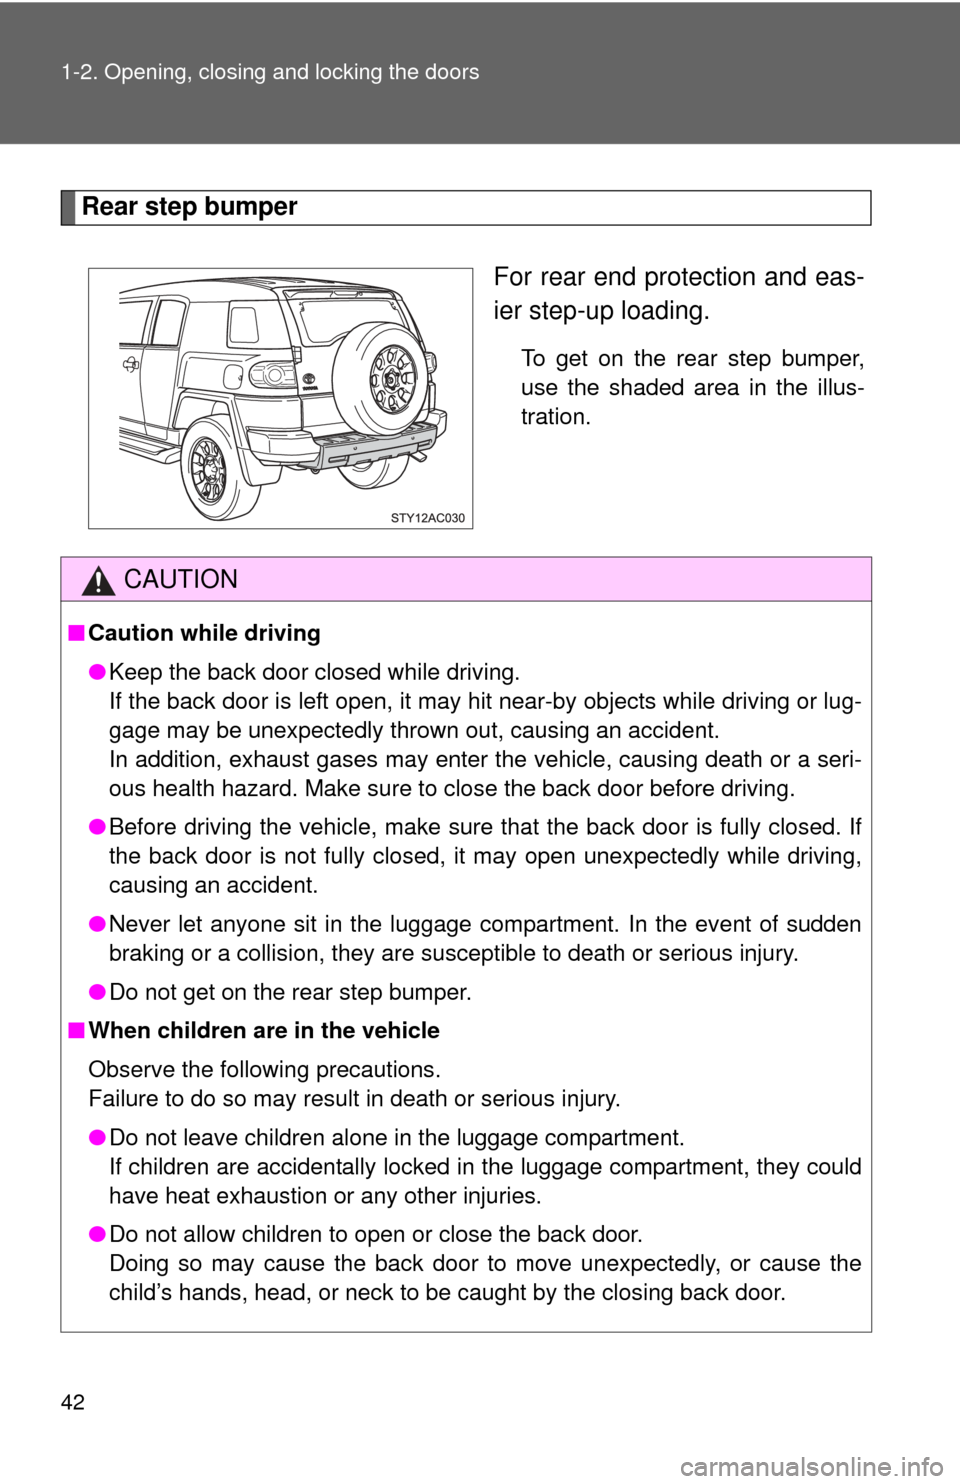 TOYOTA FJ CRUISER 2013 1.G Service Manual 42 1-2. Opening, closing and locking the doors
Rear step bumperFor rear end protection and eas-
ier step-up loading.
To get on the rear step bumper,
use the shaded area in the illus-
tration.
CAUTION
